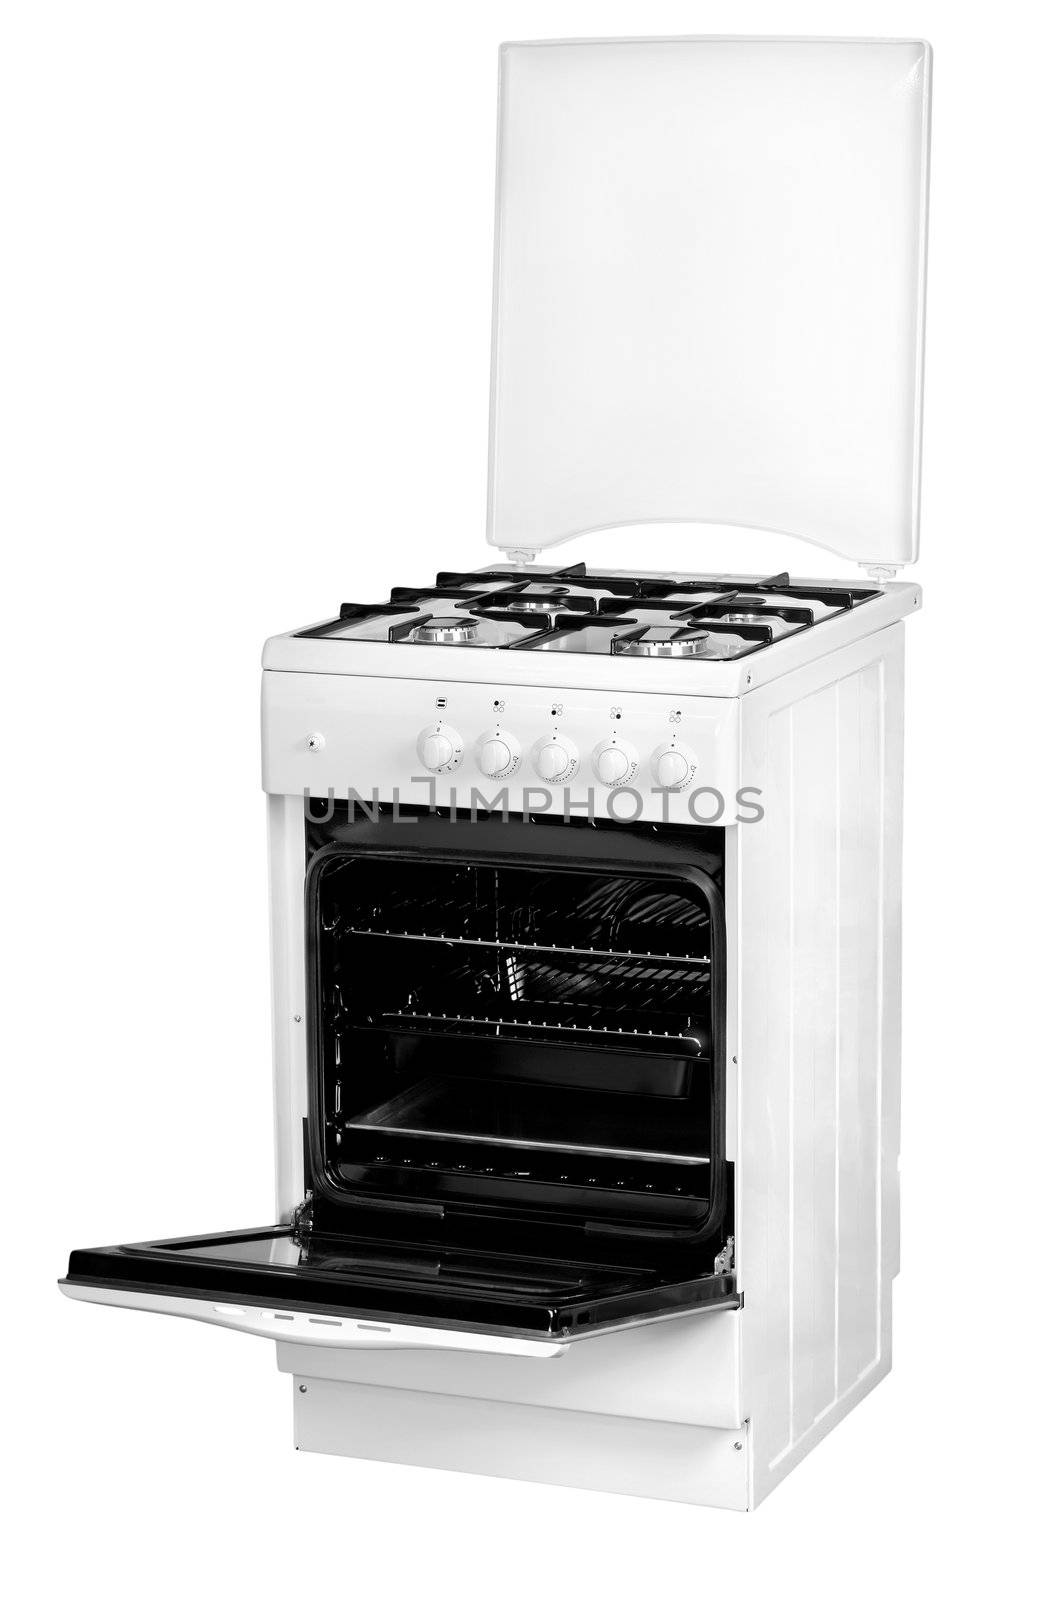 Gas cooker by Givaga